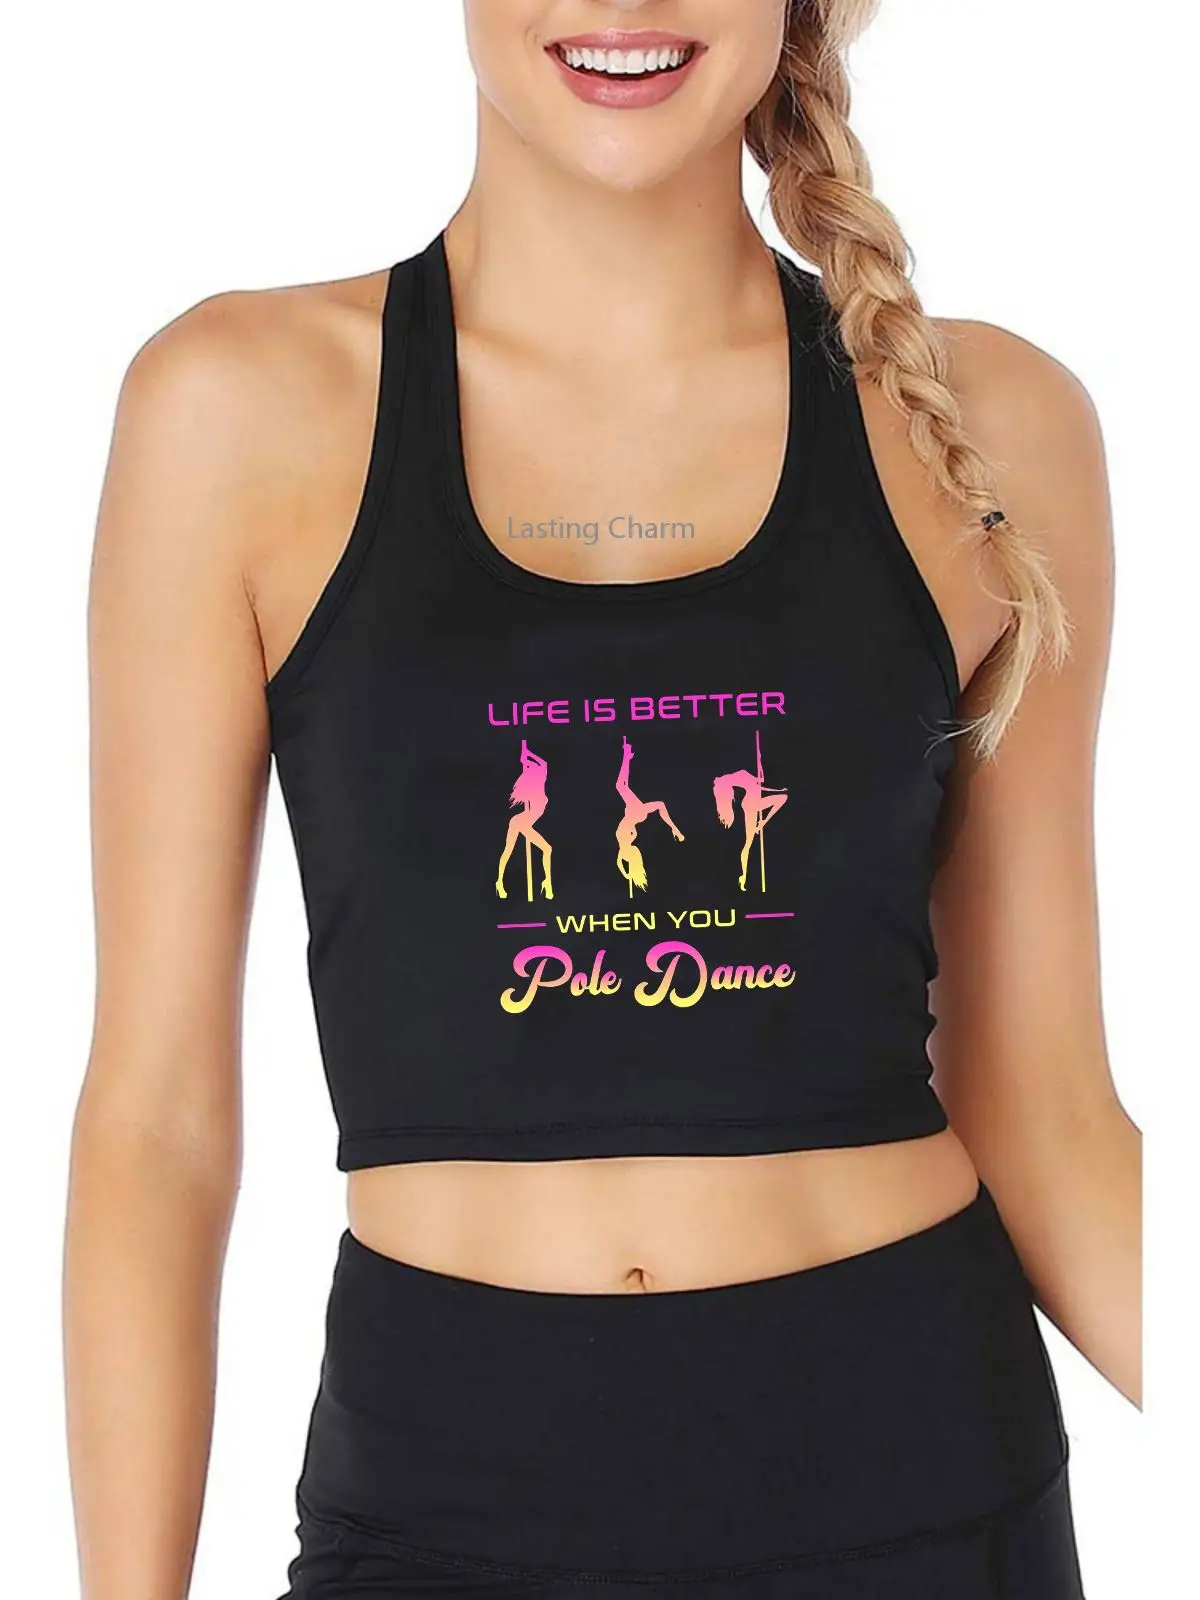 

Life Is Better When You Pole Dance Design Breathable Slim Fit Tank Top Women's Personalized Yoga Sports Training Crop Tops